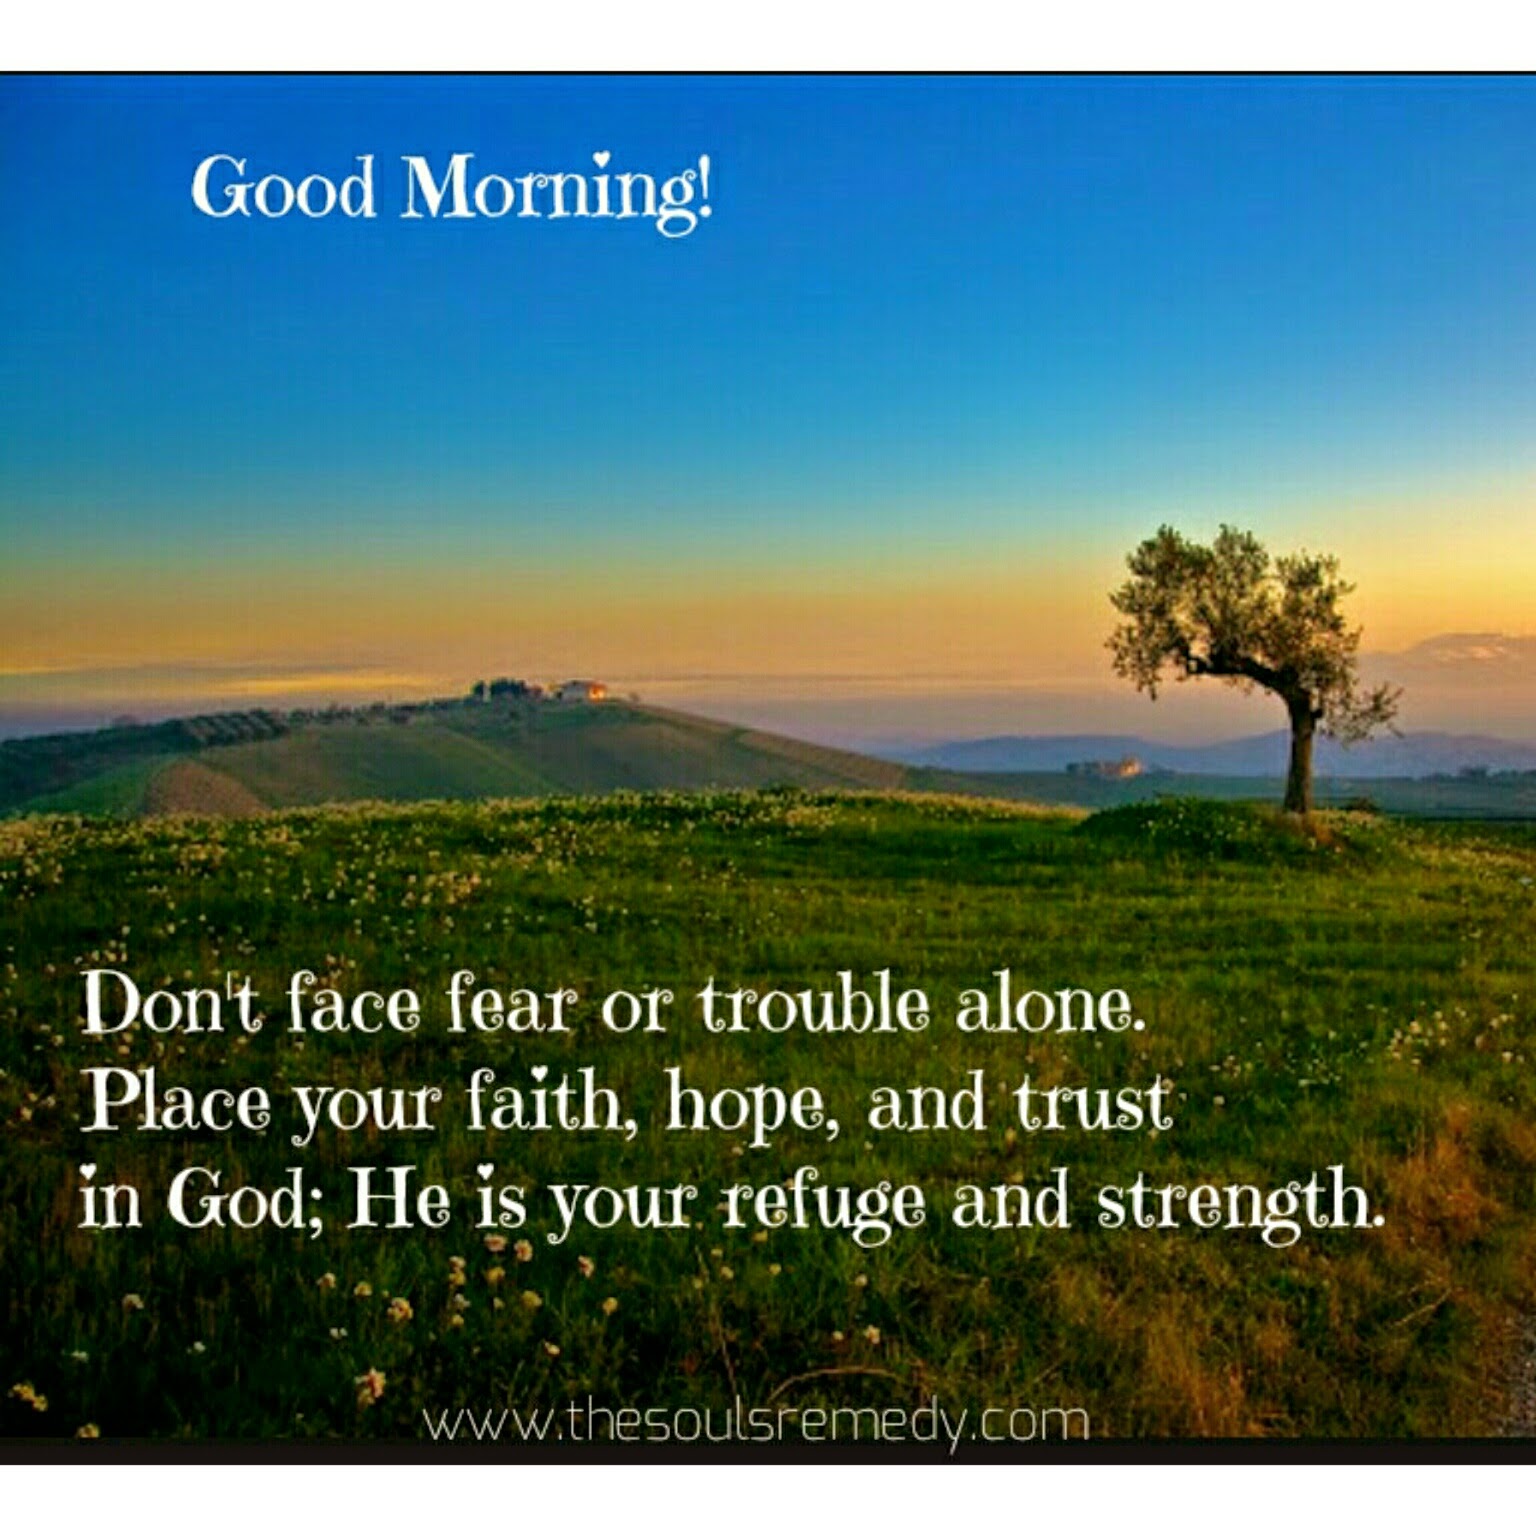 The Souls Remedy: Good Morning! ~ The Refuge & Strength of God